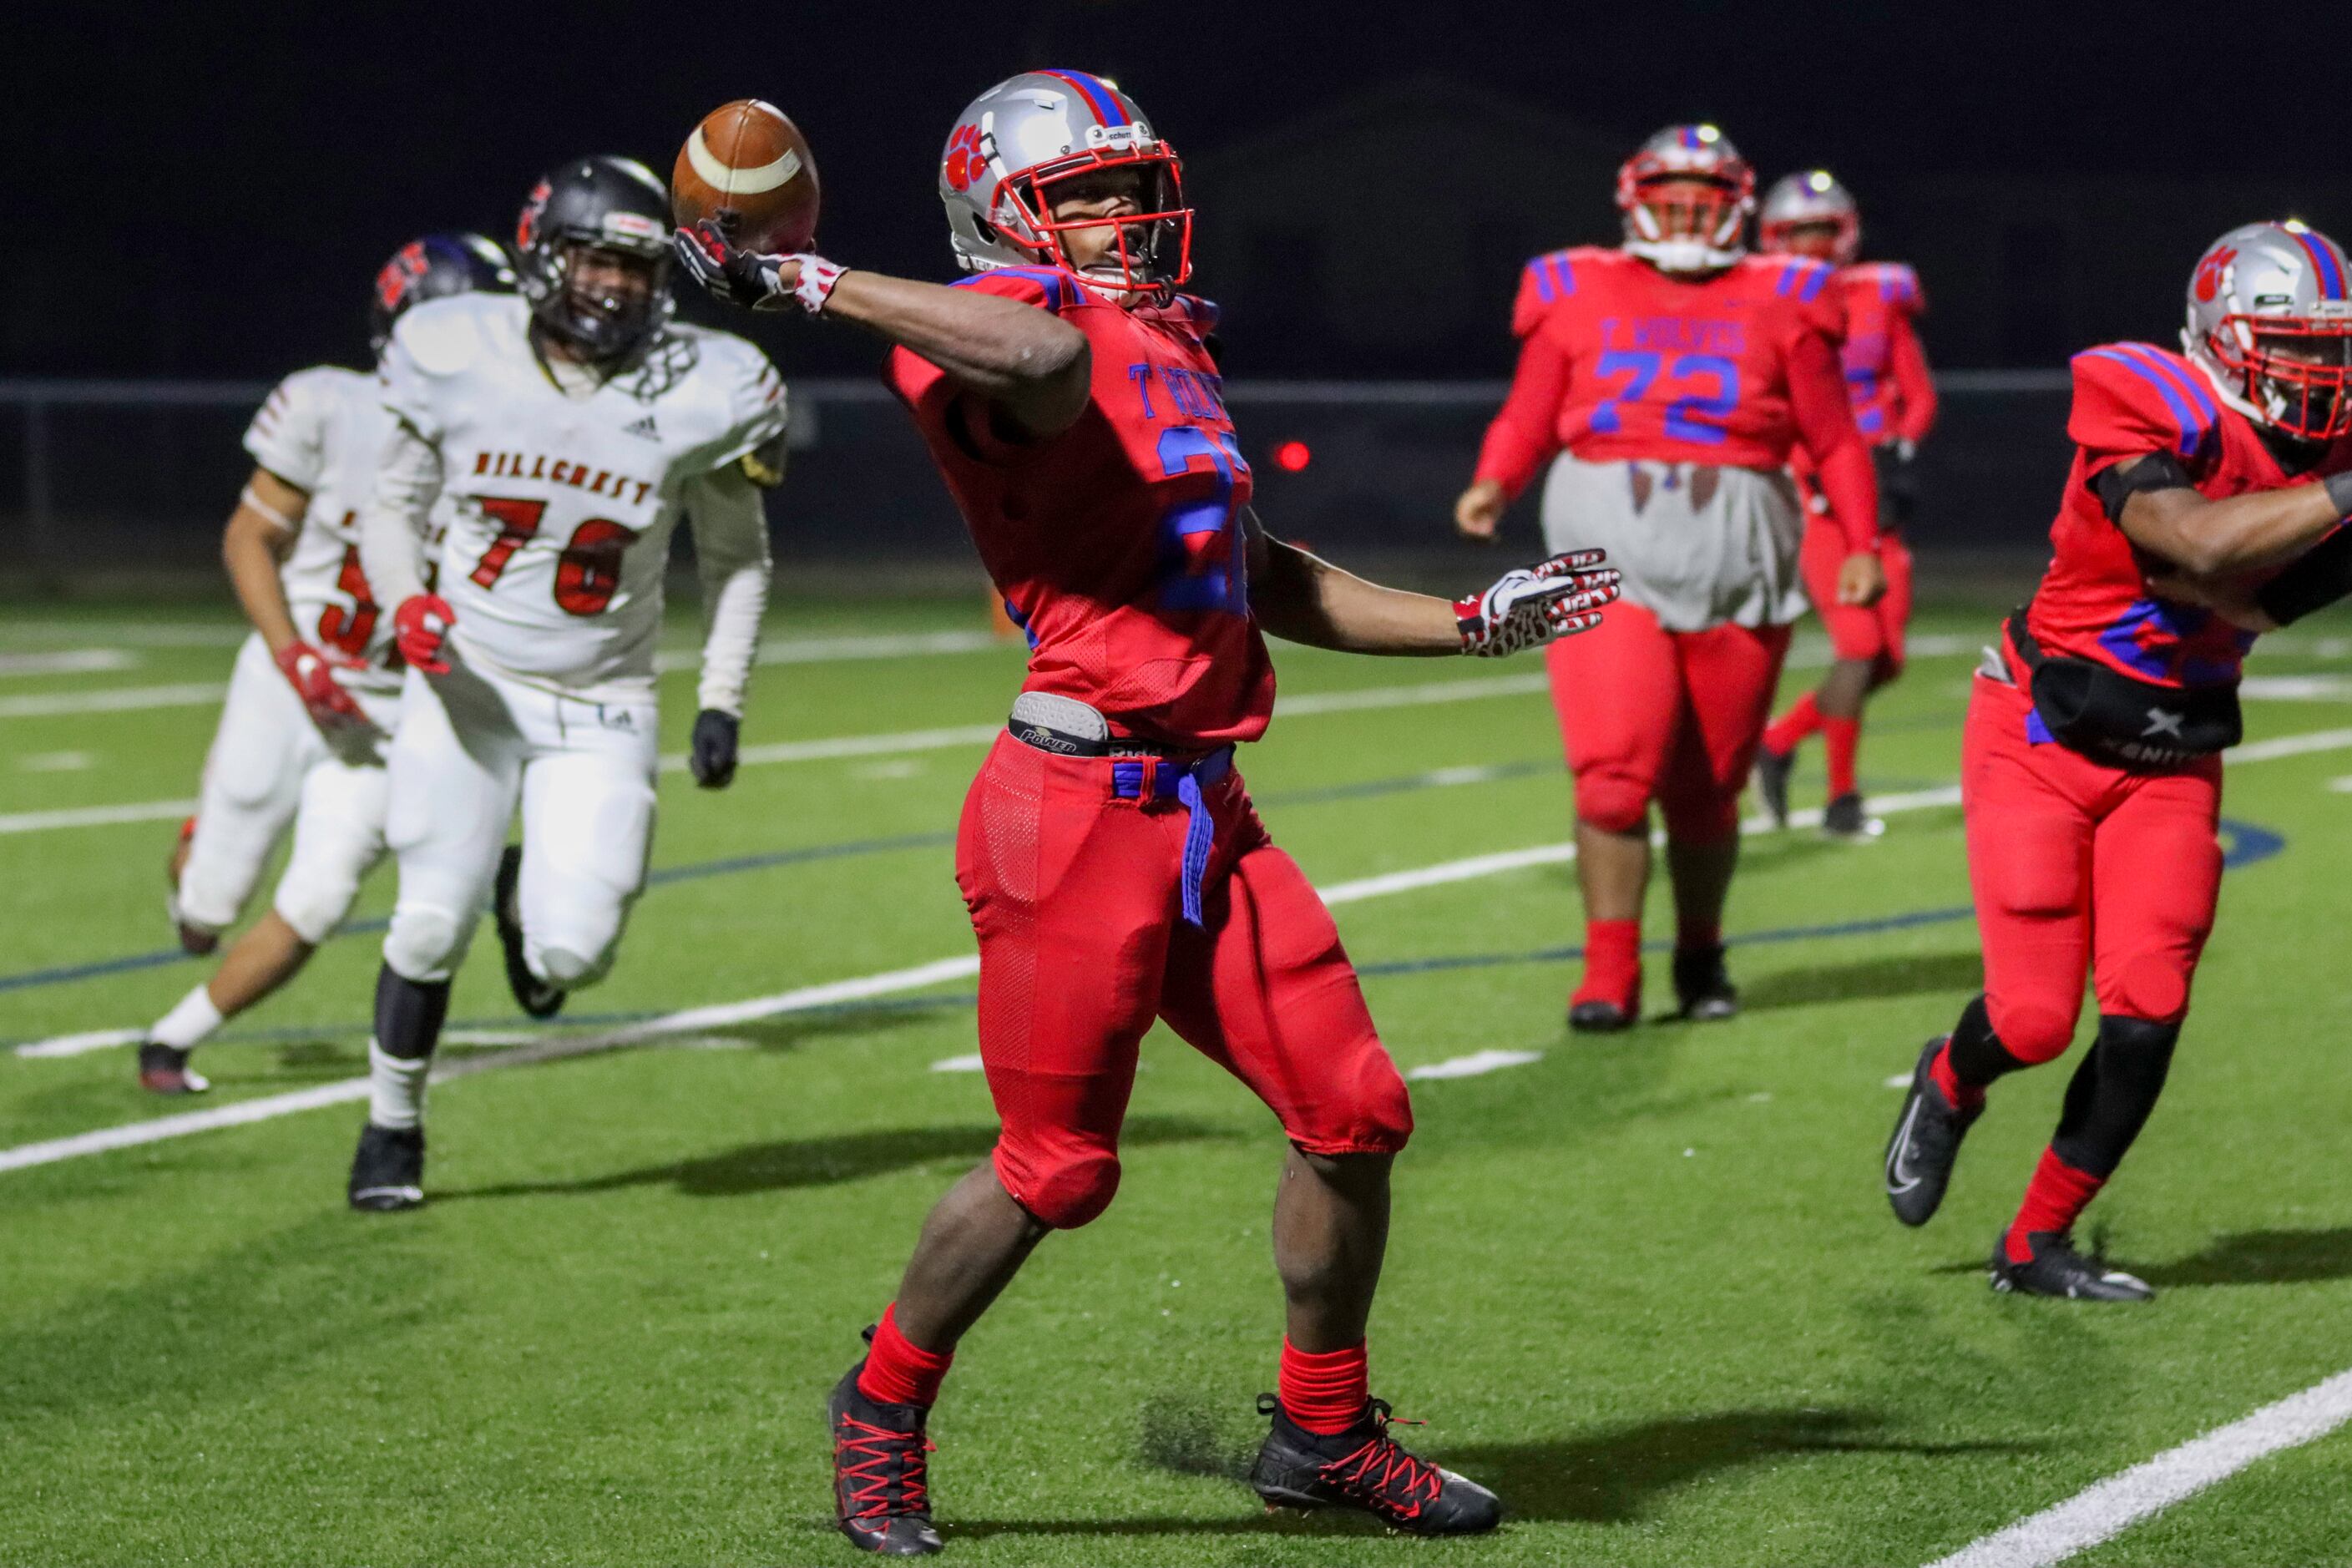 Spruce running back Shawn Hodge (22) throws a pass during the second half against Hillcrest...